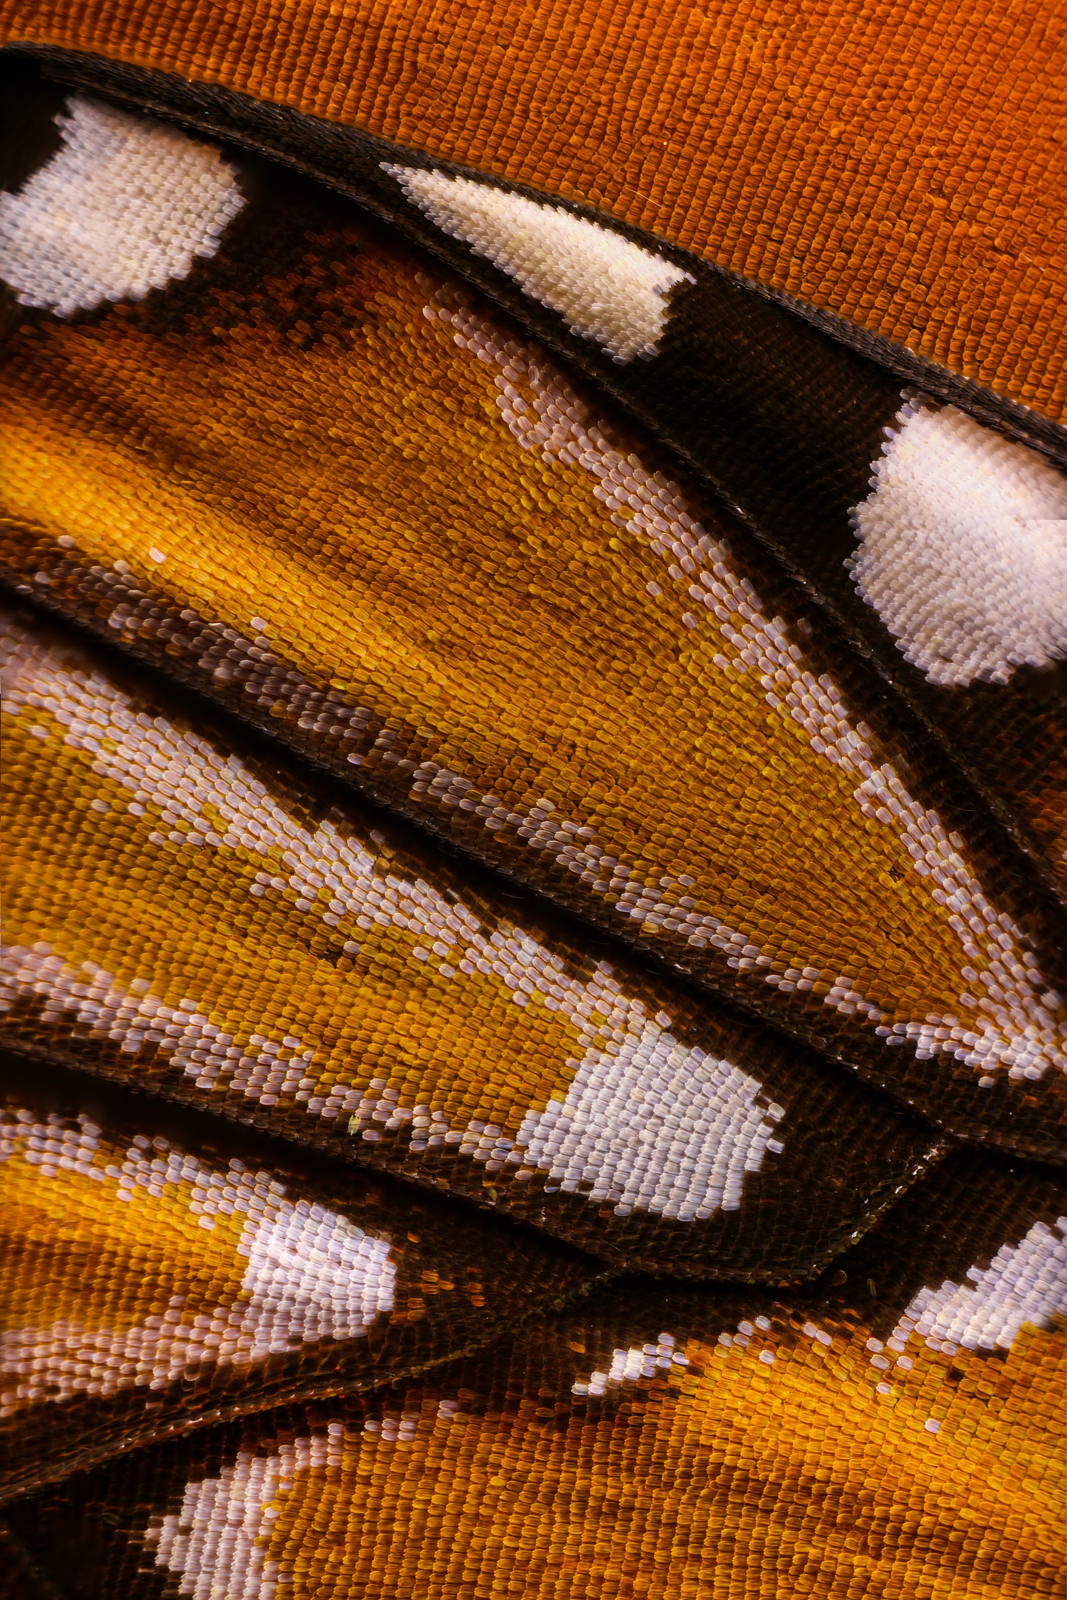 Macro images of butterfly wings